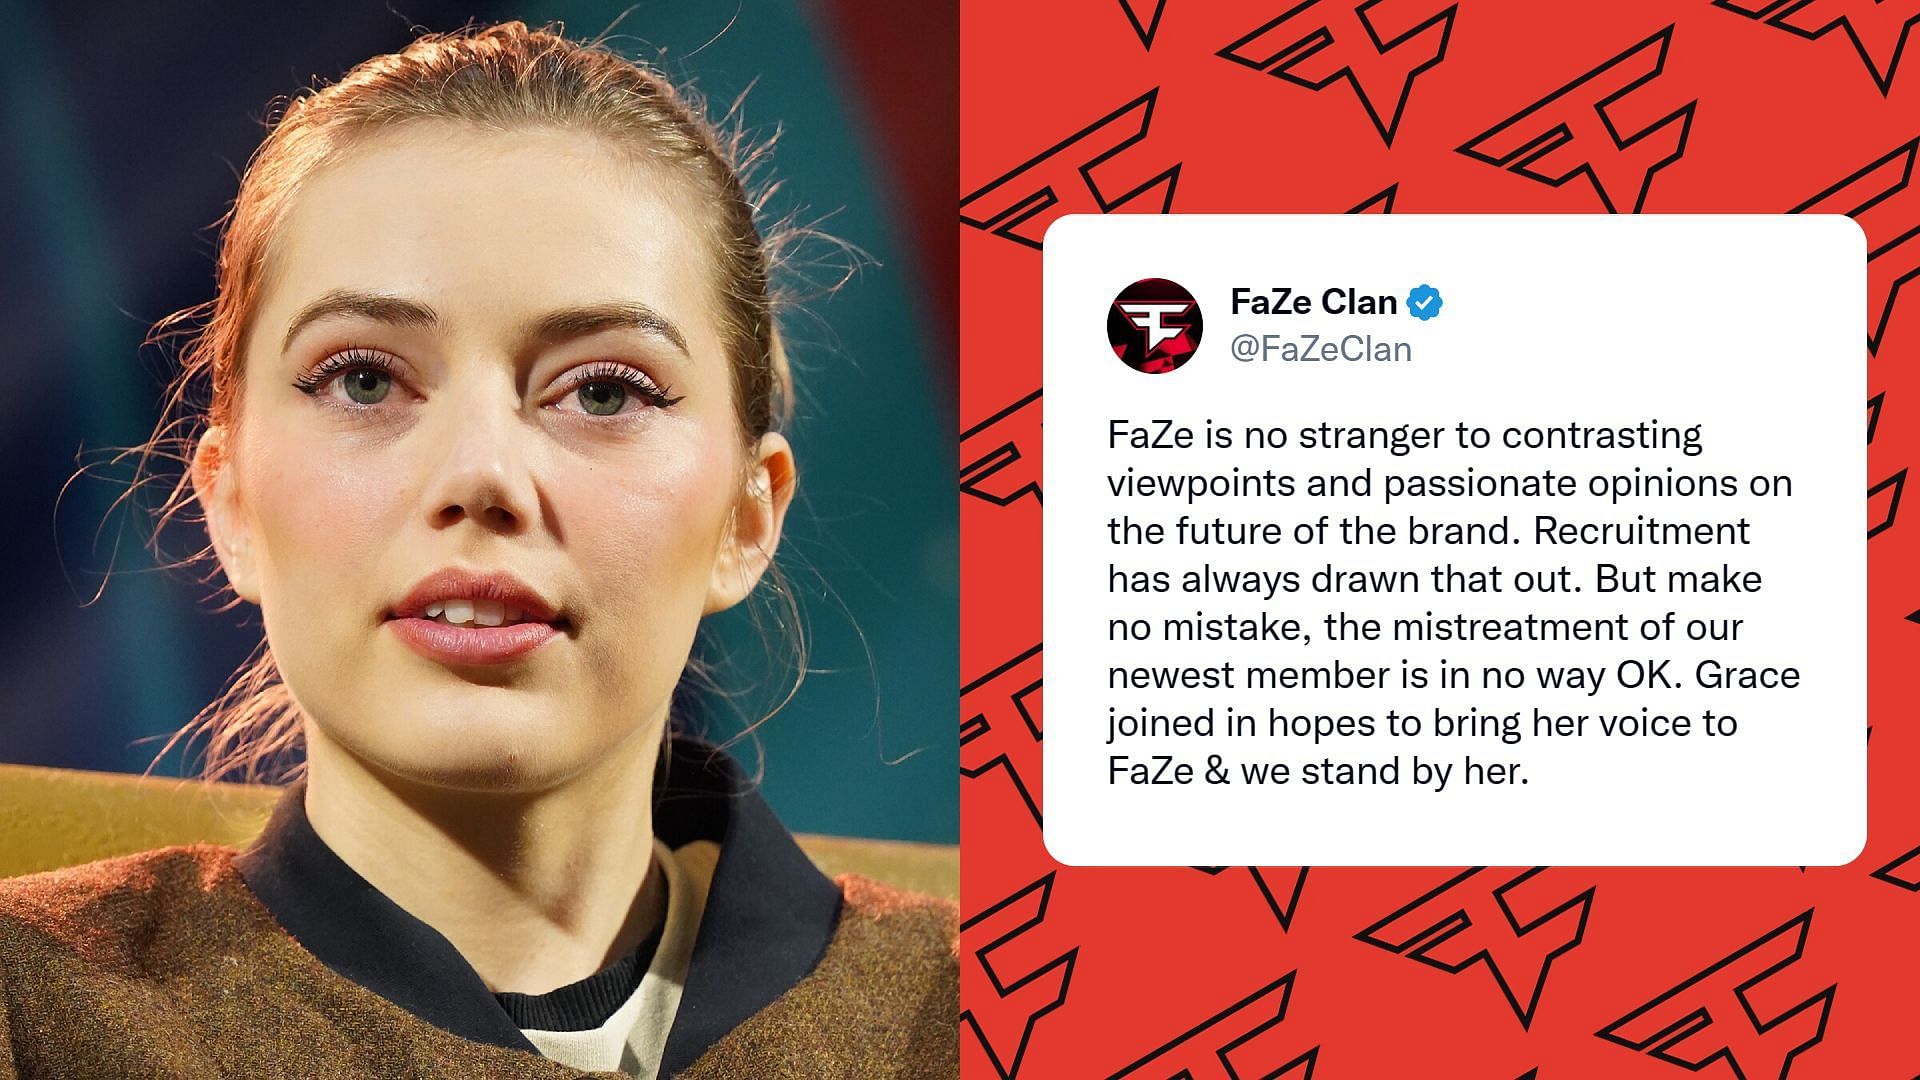 FaZe Clan comes out in support of Grace Van Dien amid drama with Rain (Image via FaZe Clan/Twitter)